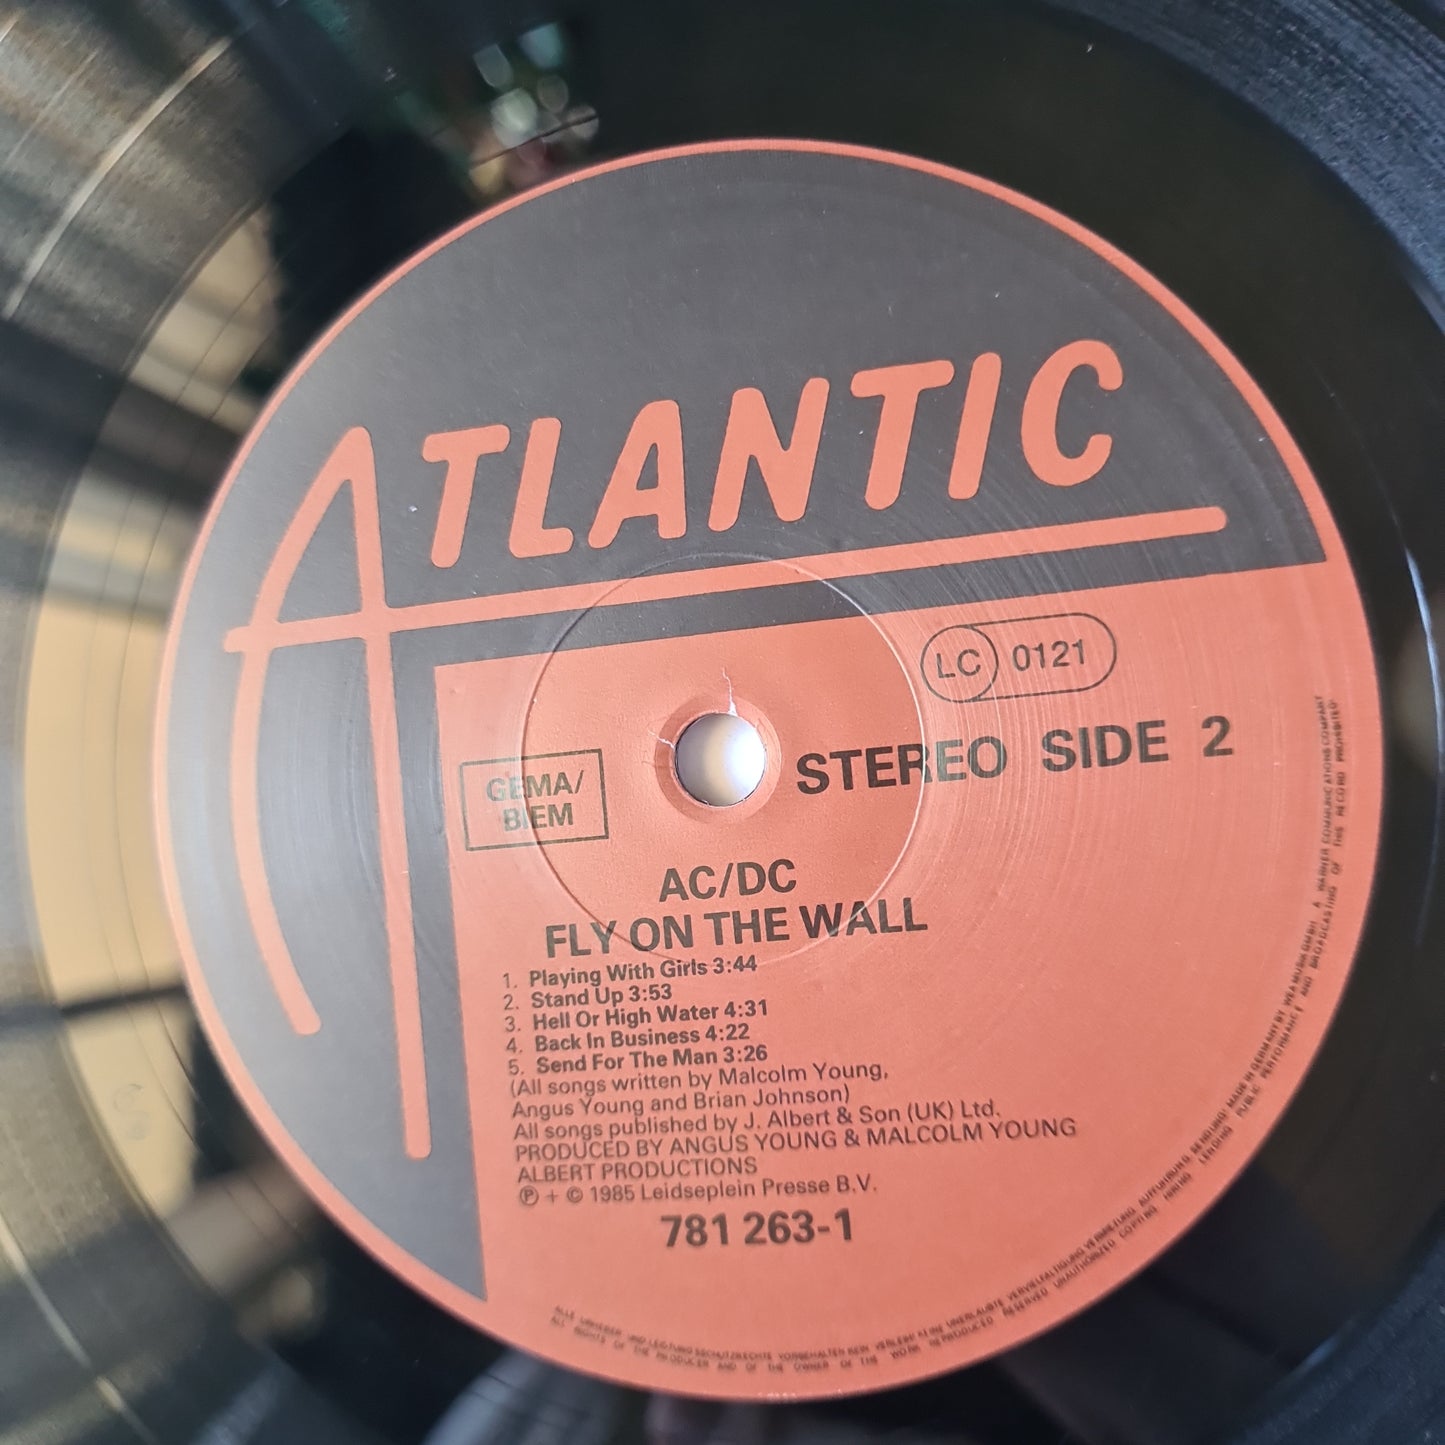 AC/DC – Fly On The Wall - 1985 (1985 German Pressing) - Vinyl Record